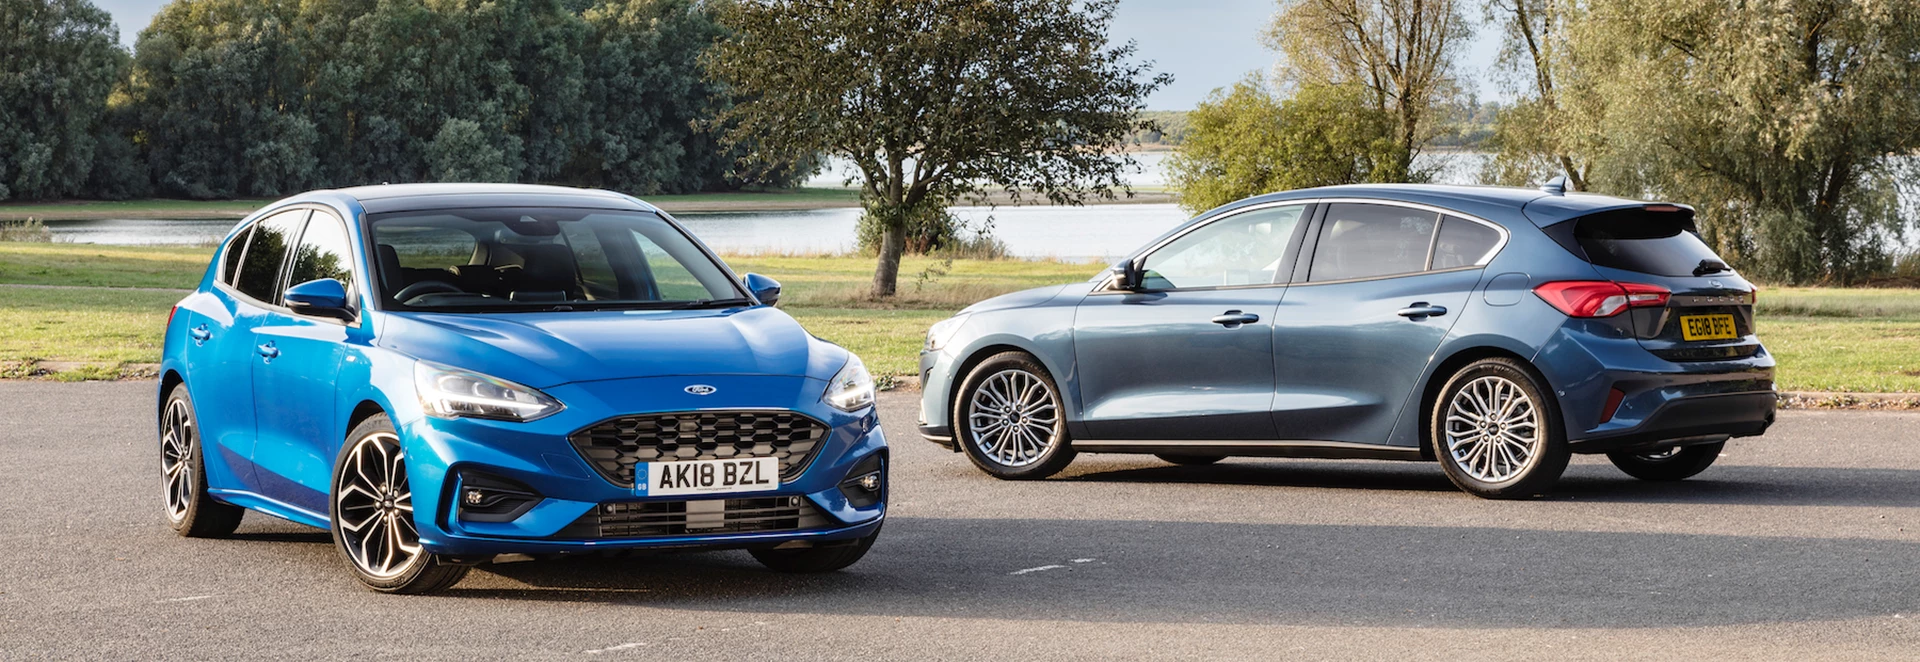 Ford Focus line-up revised with new trim level